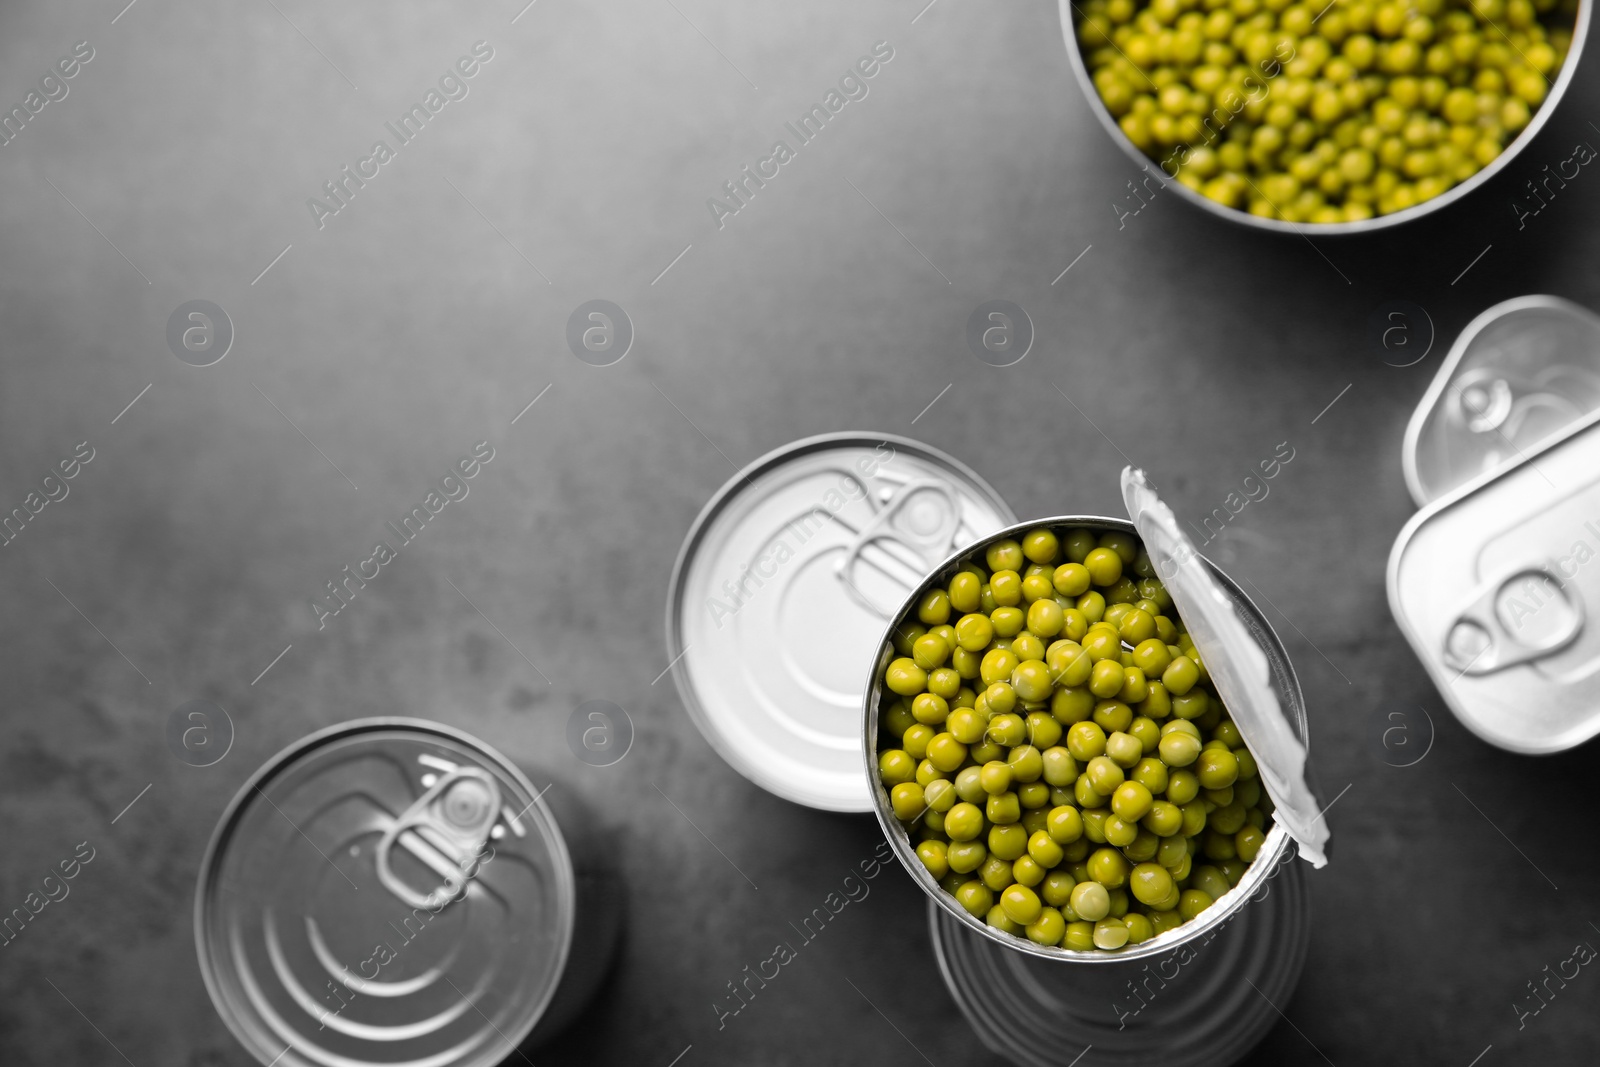 Photo of Tin cans and green peas on grey table, top view with space for text